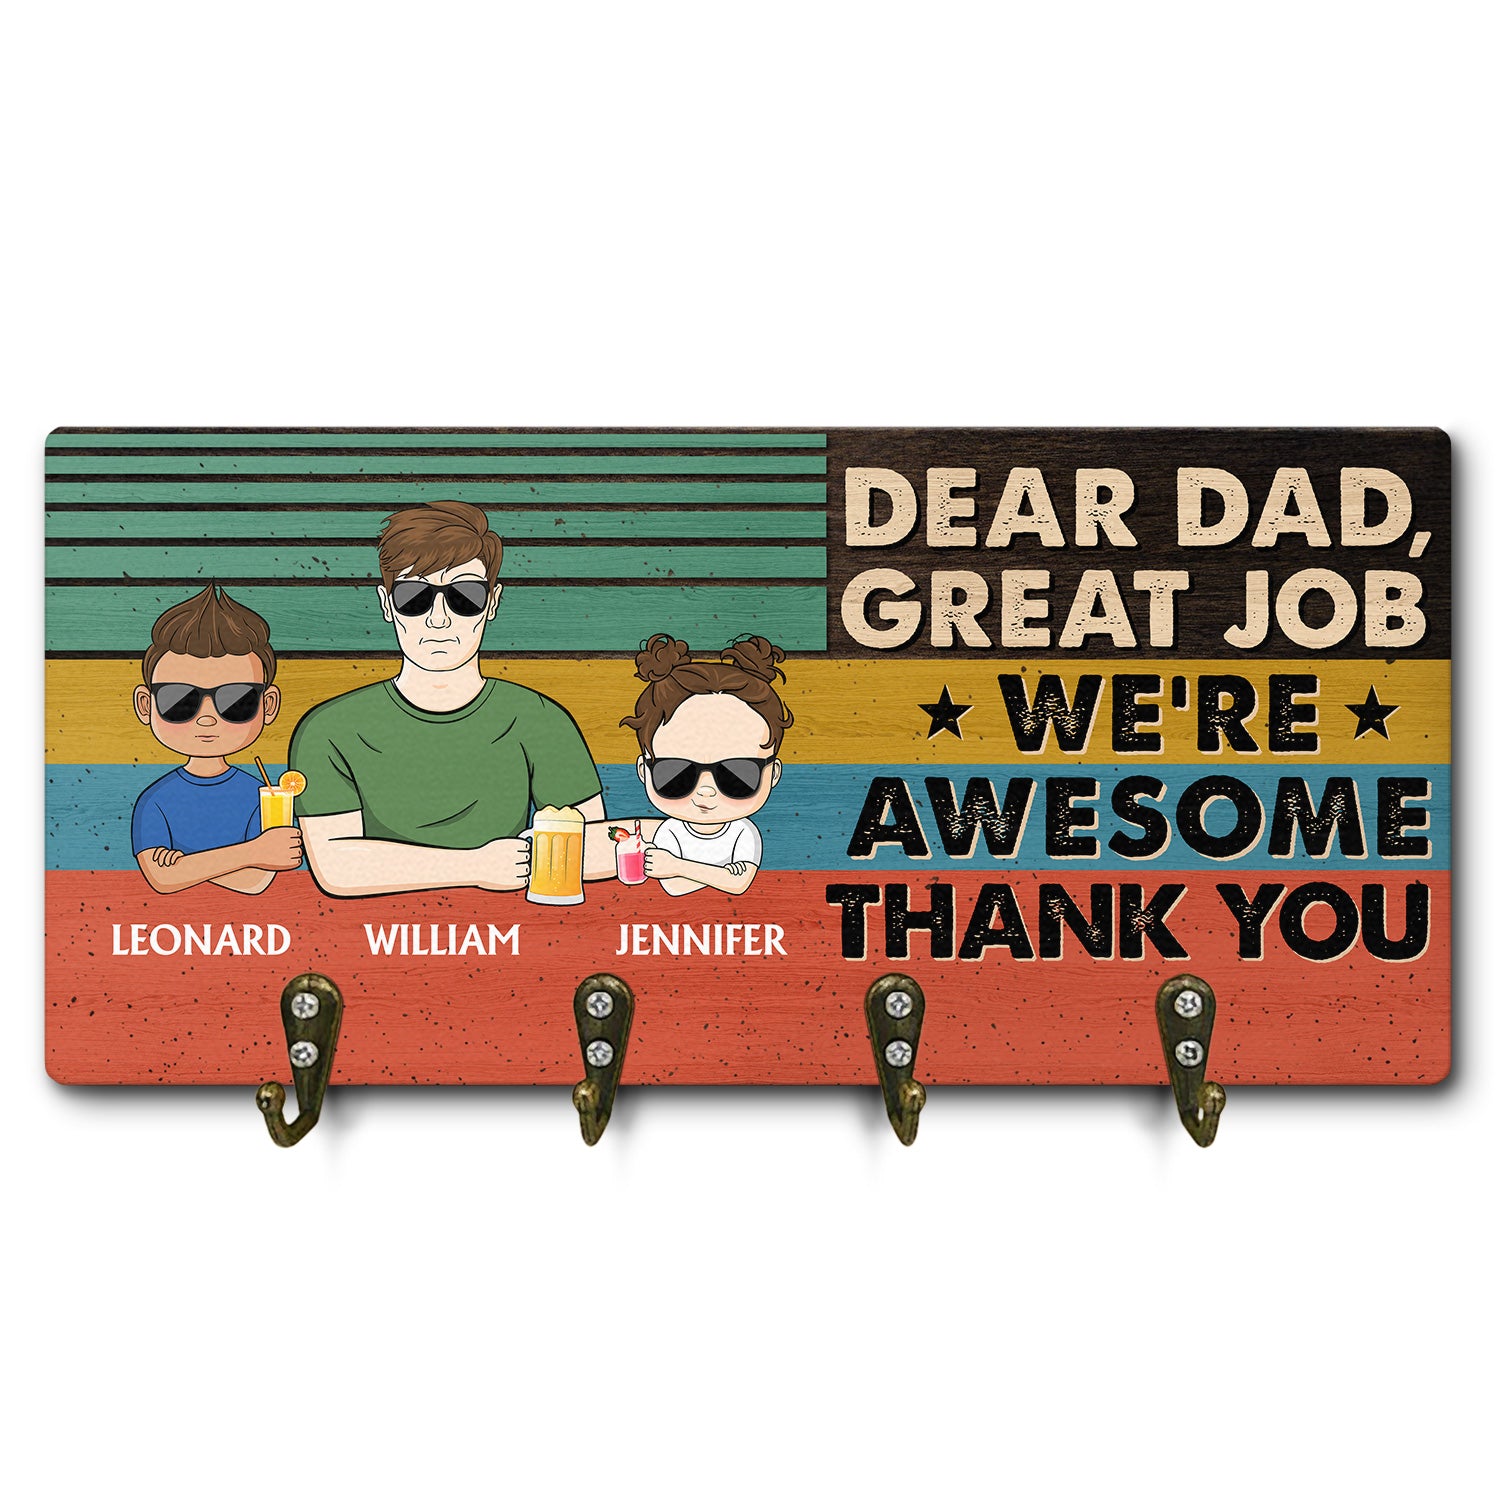 Dear Dad Great Job We're Awesome Thank You Young - Birthday, Loving Gift For Father, Grandpa, Grandfather - Personalized Custom Wood Key Holder